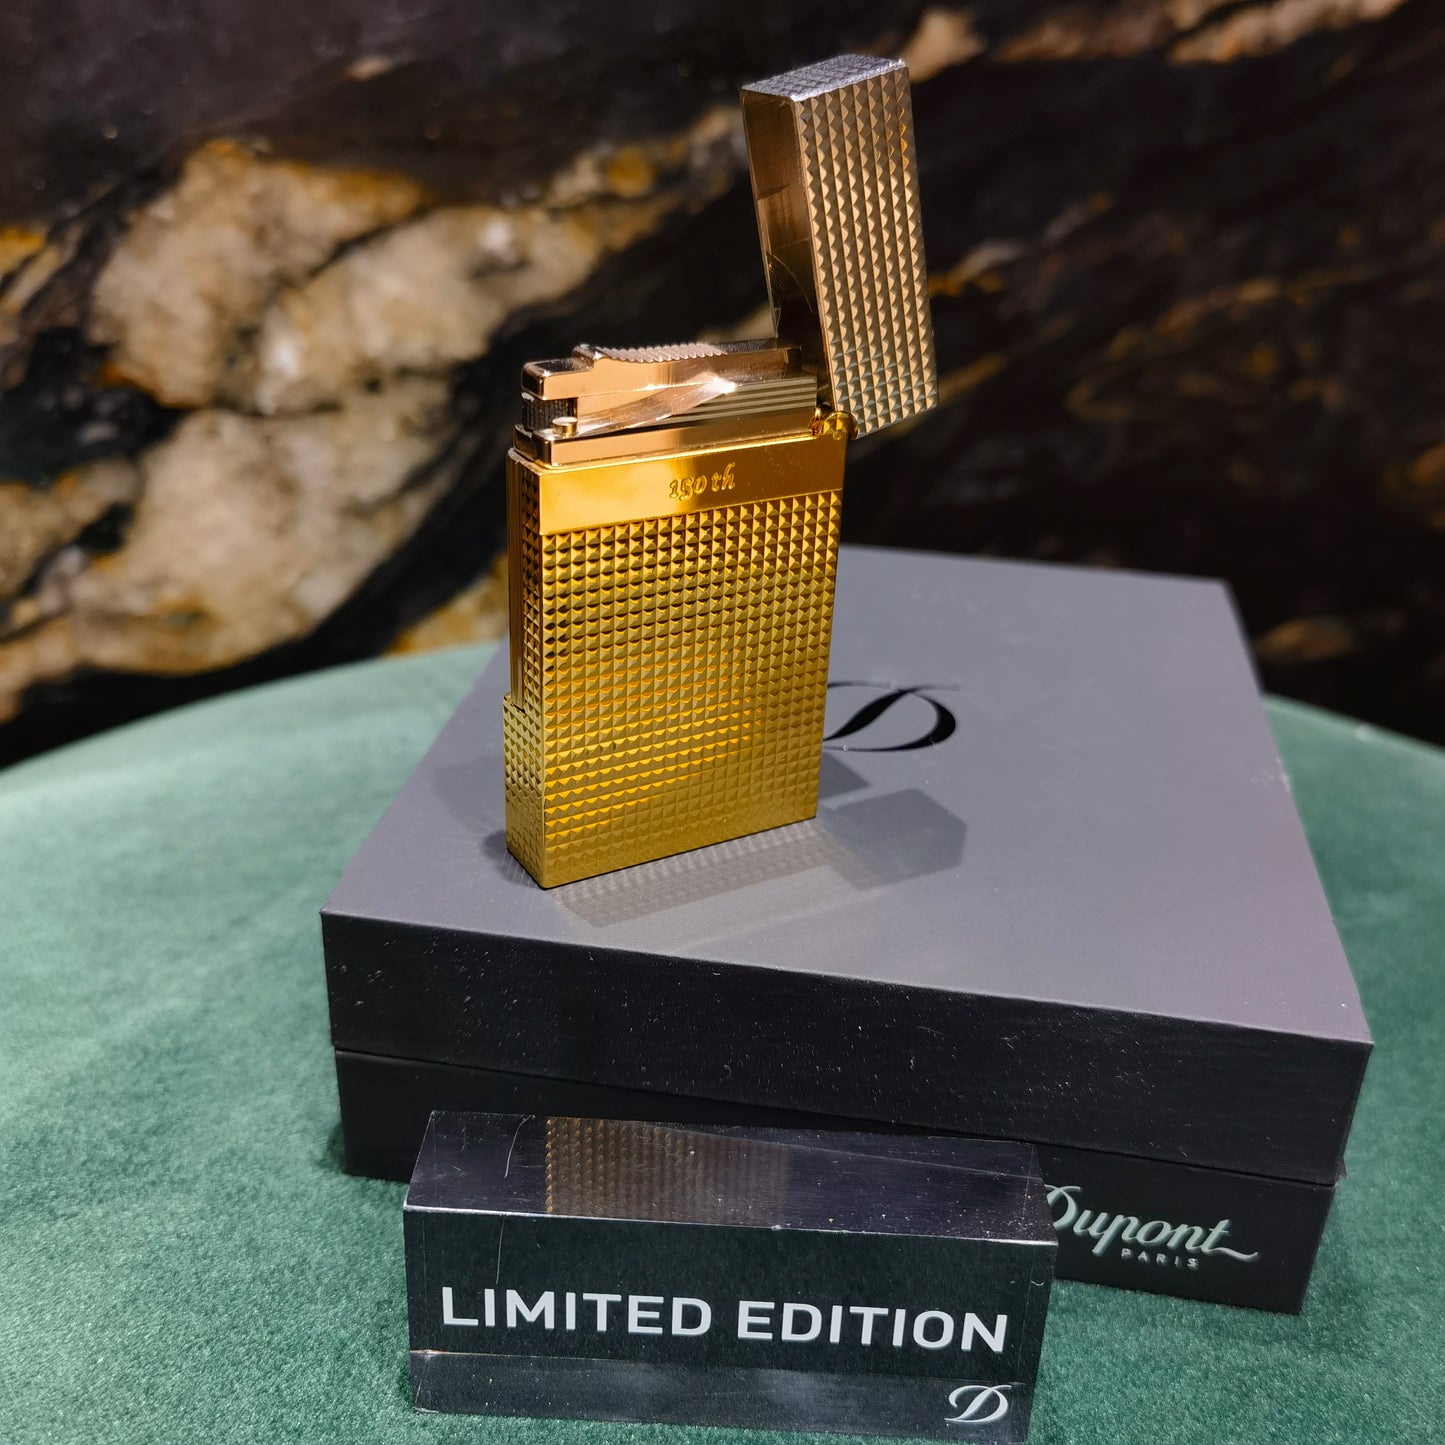 S.T. Dupont LIGNE 2 LIGHTER Golden Hour 150th Anniversary Limited Editon